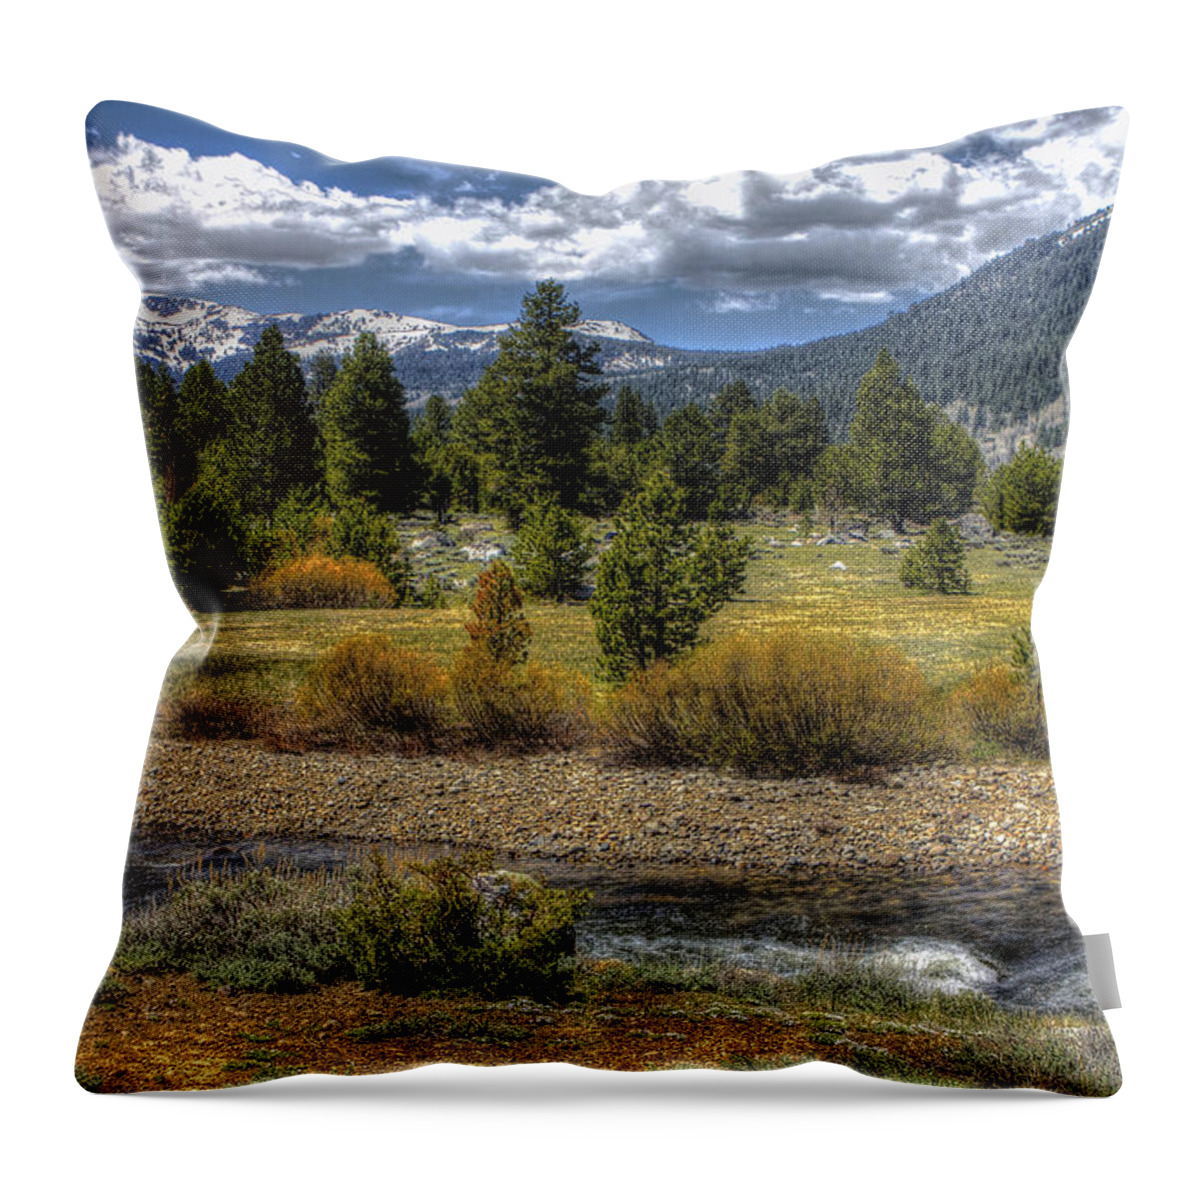 Landscape Throw Pillow featuring the photograph Hope Valley Wildlife Area by SC Heffner